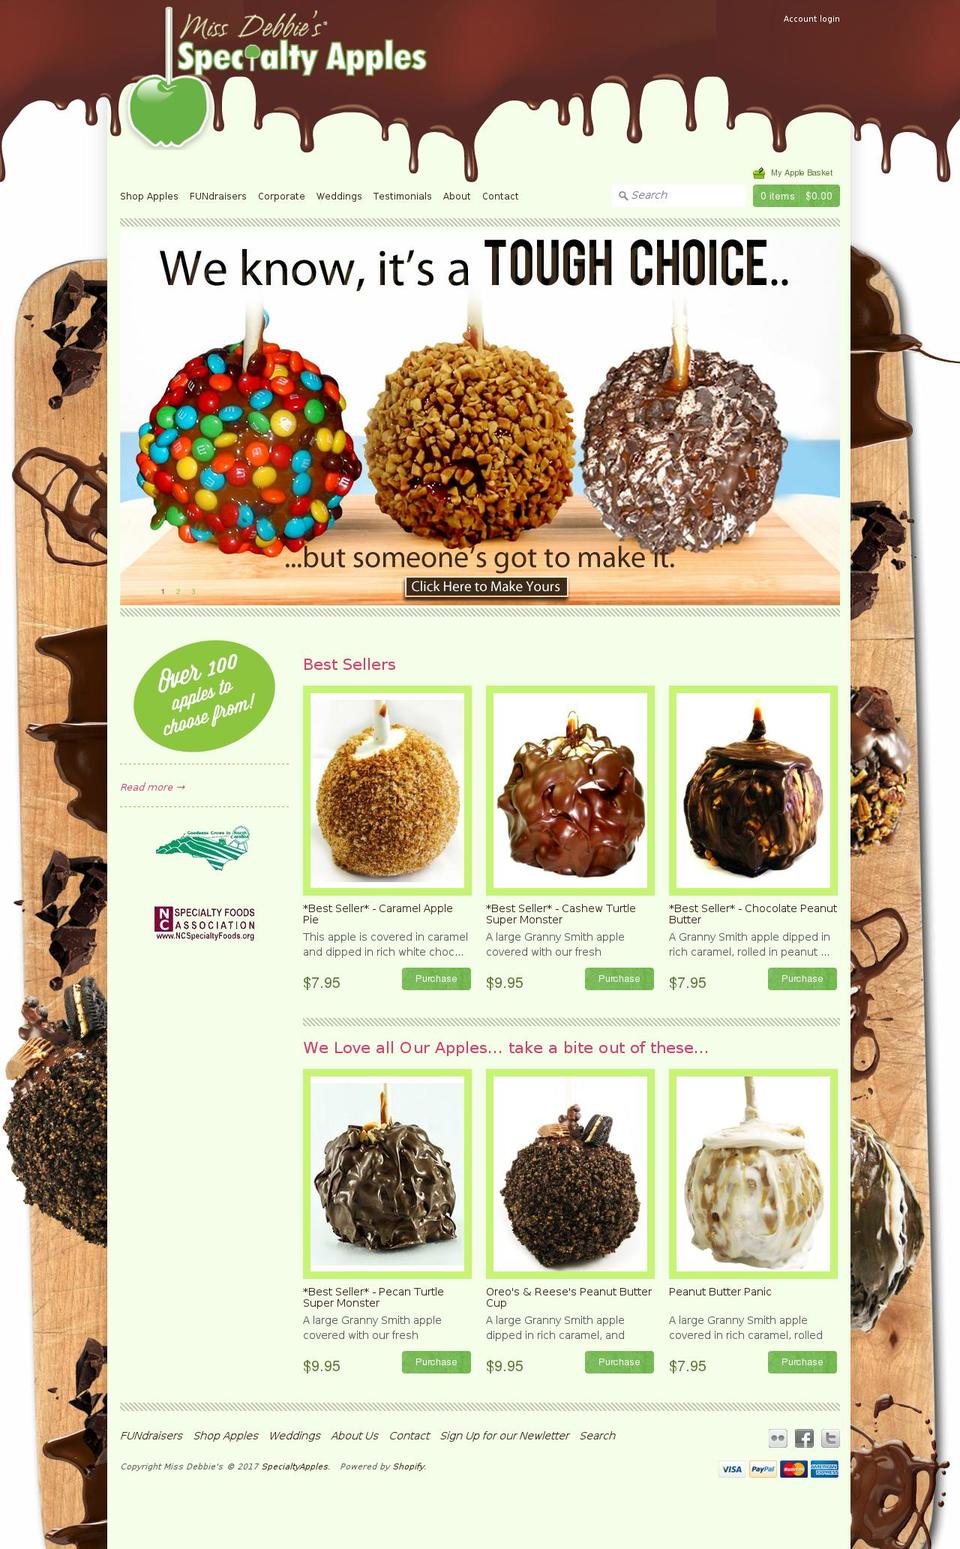 Expression Shopify theme site example specialtyapples.com